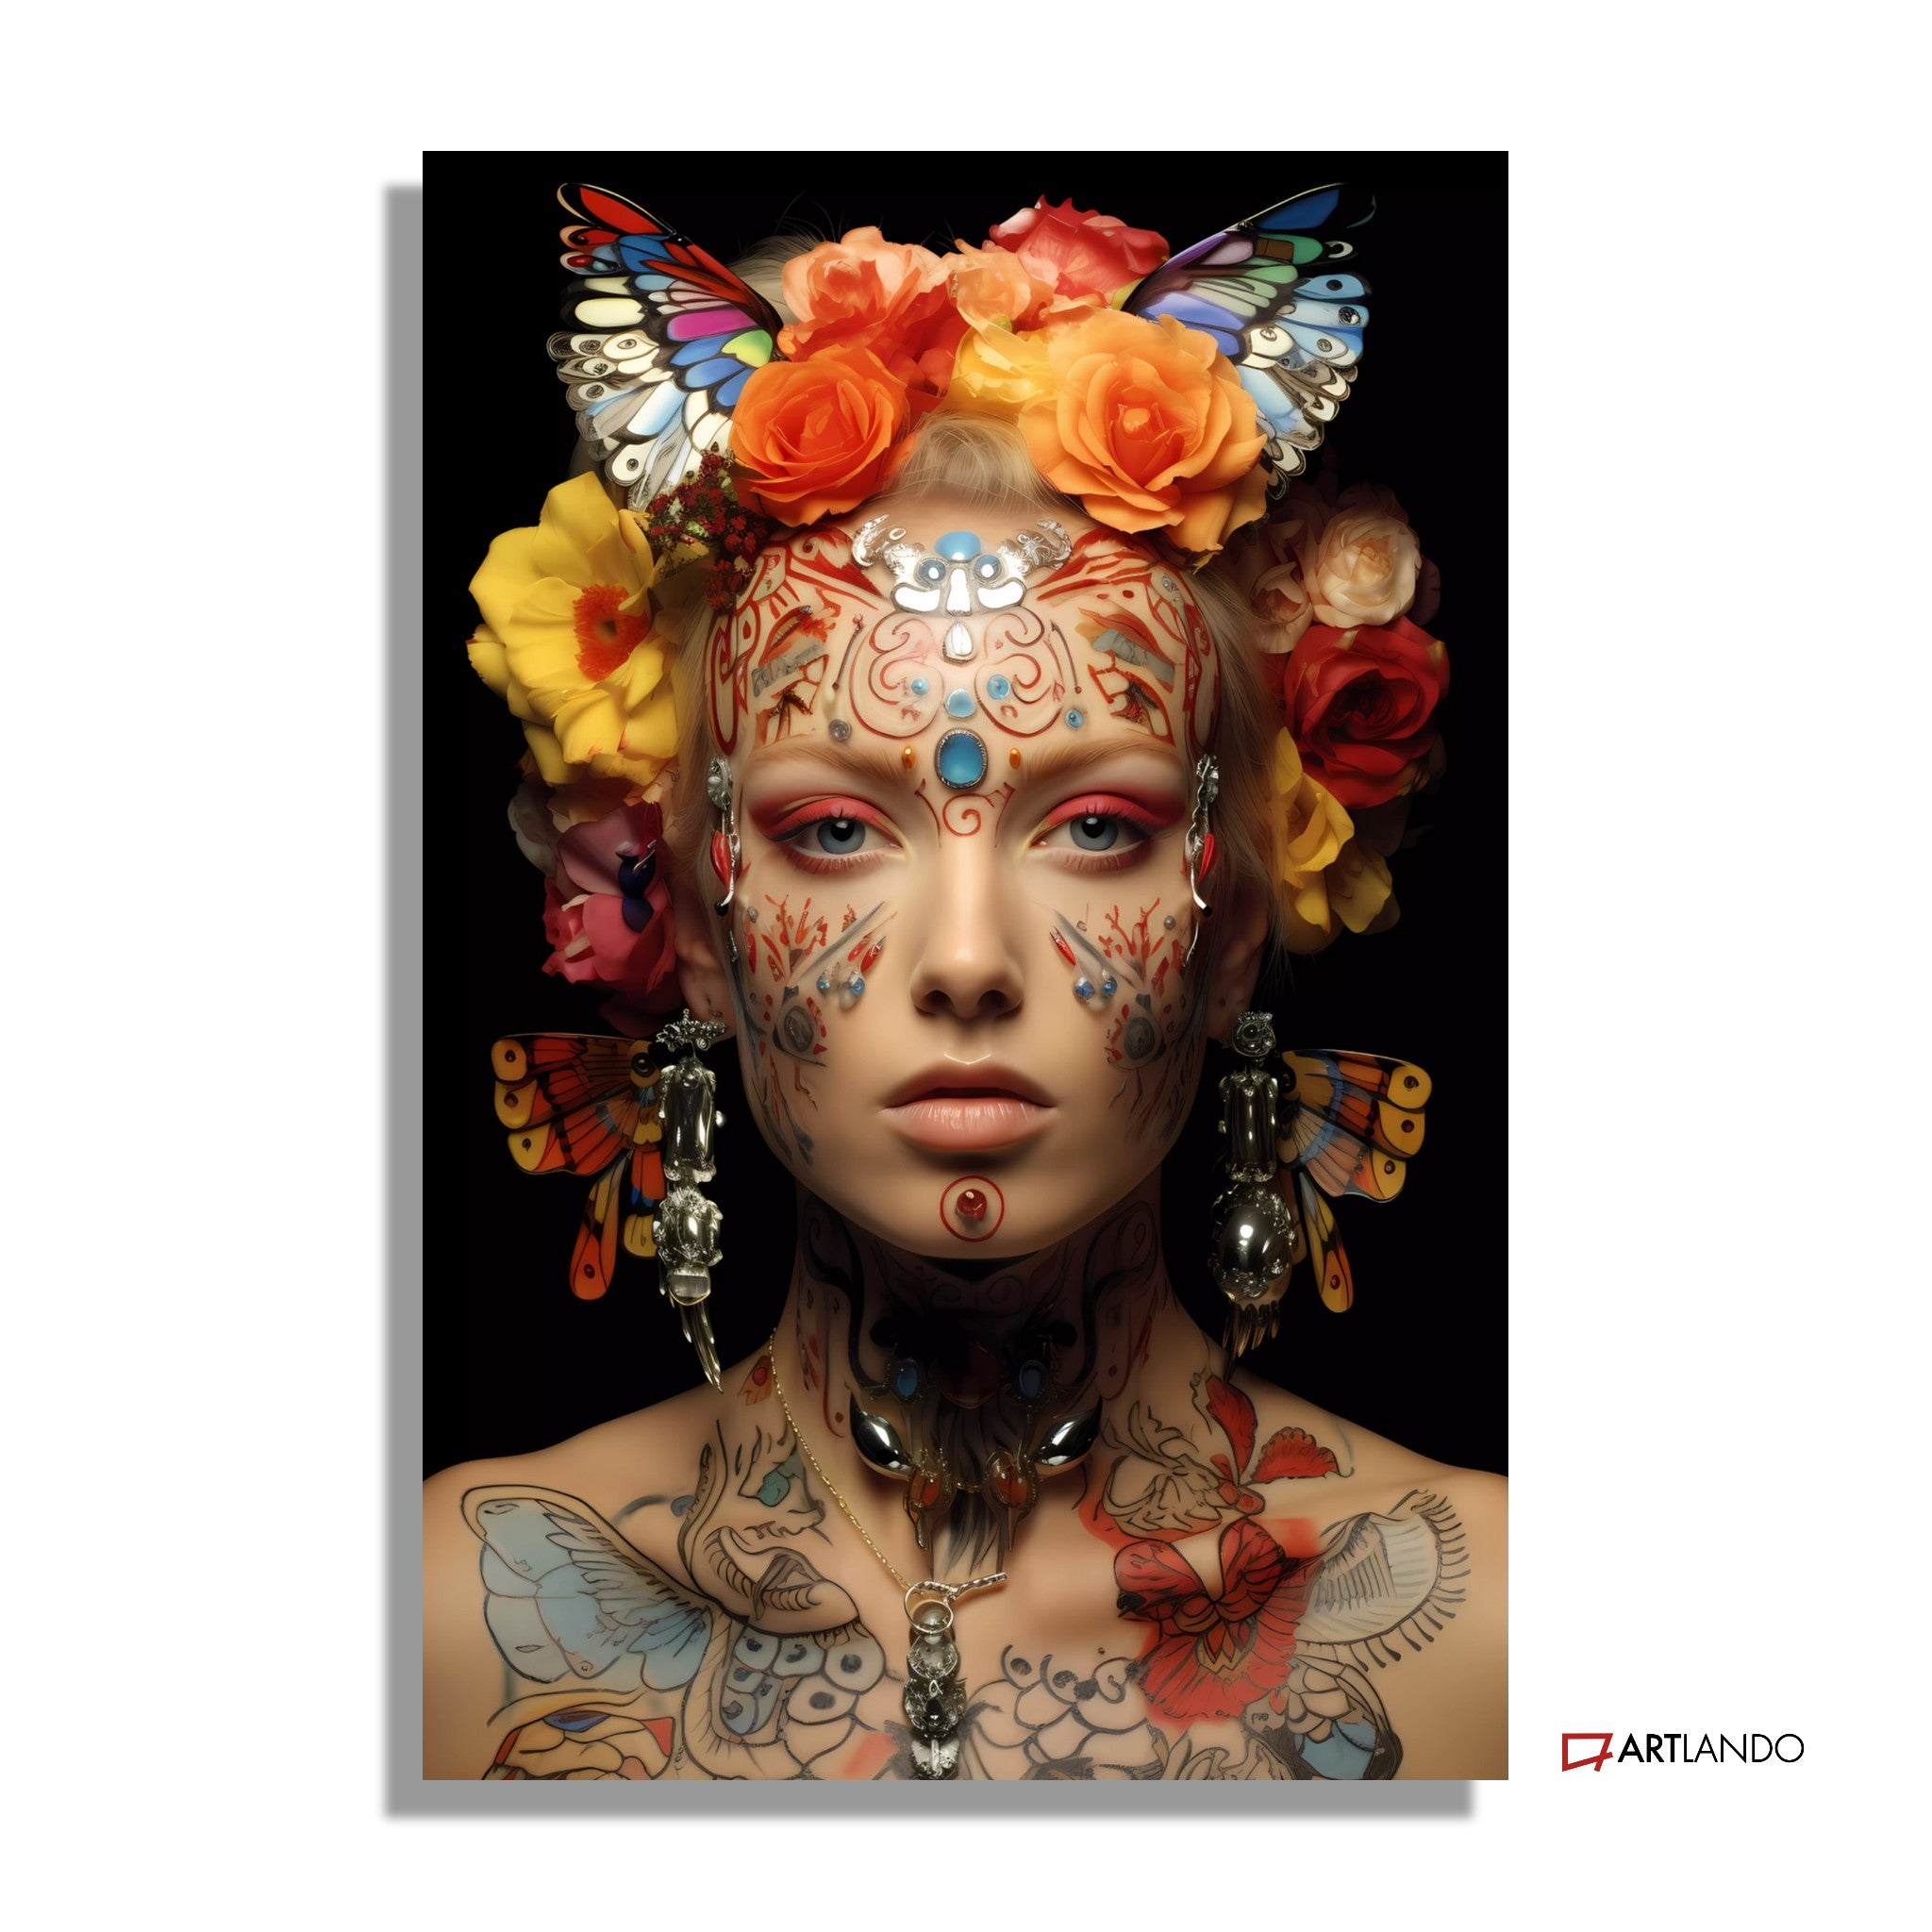 TATTOO GIRL INSPIRED BY DAVID LACHAPELLE